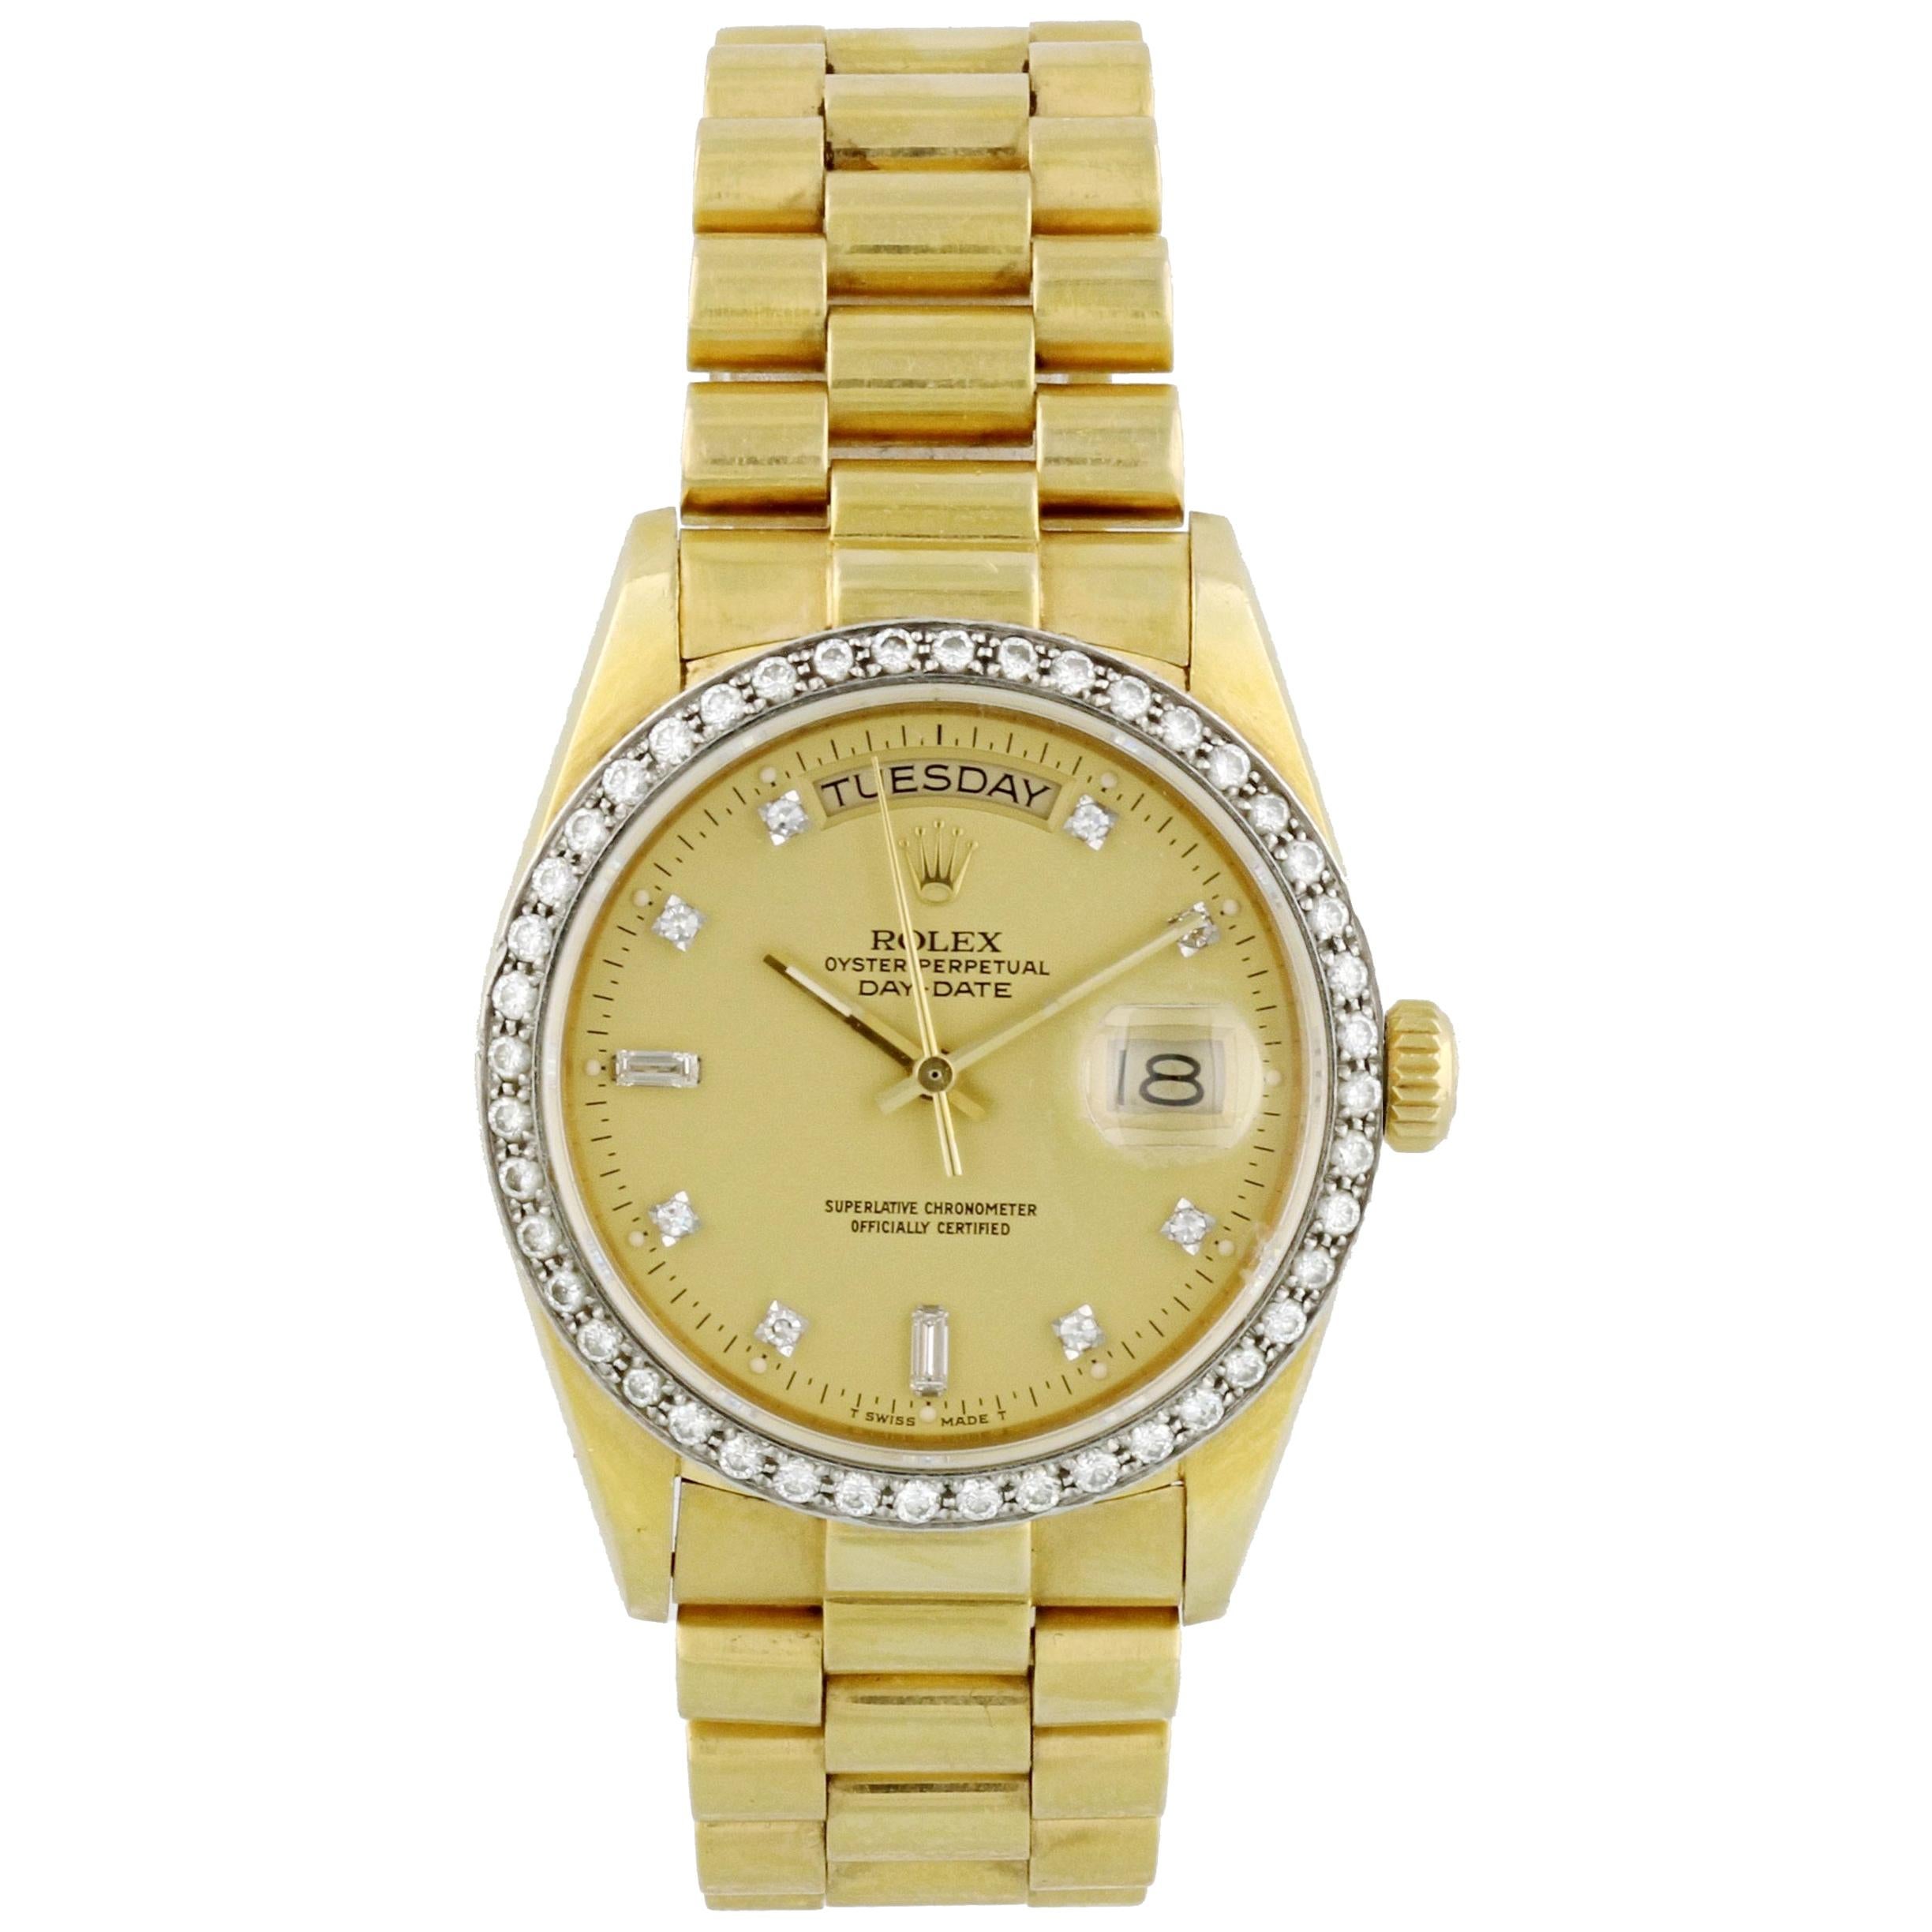 Rolex Day-Date President 18048 Diamond Dial and Bezel Men's Watch For Sale